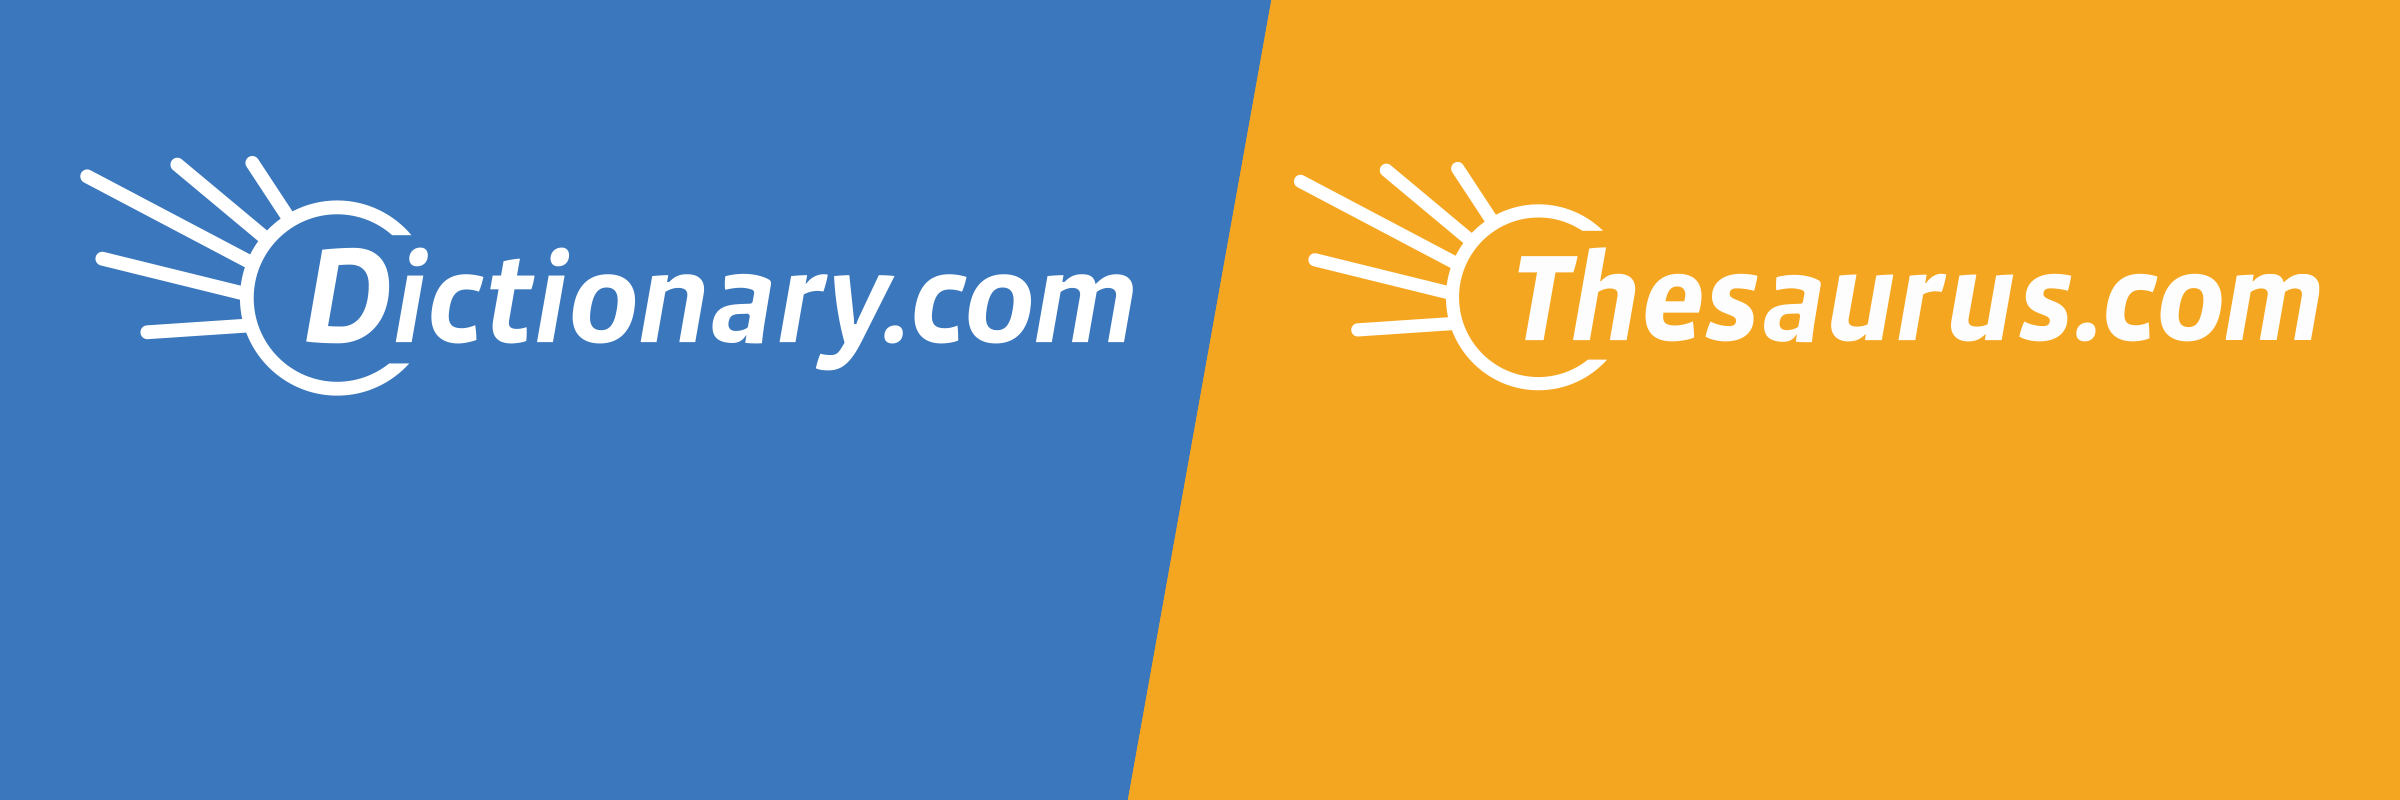 Dictionary Logo - Detroit-based Rock Holdings Acquires Dictionary.com* and Thesaurus ...